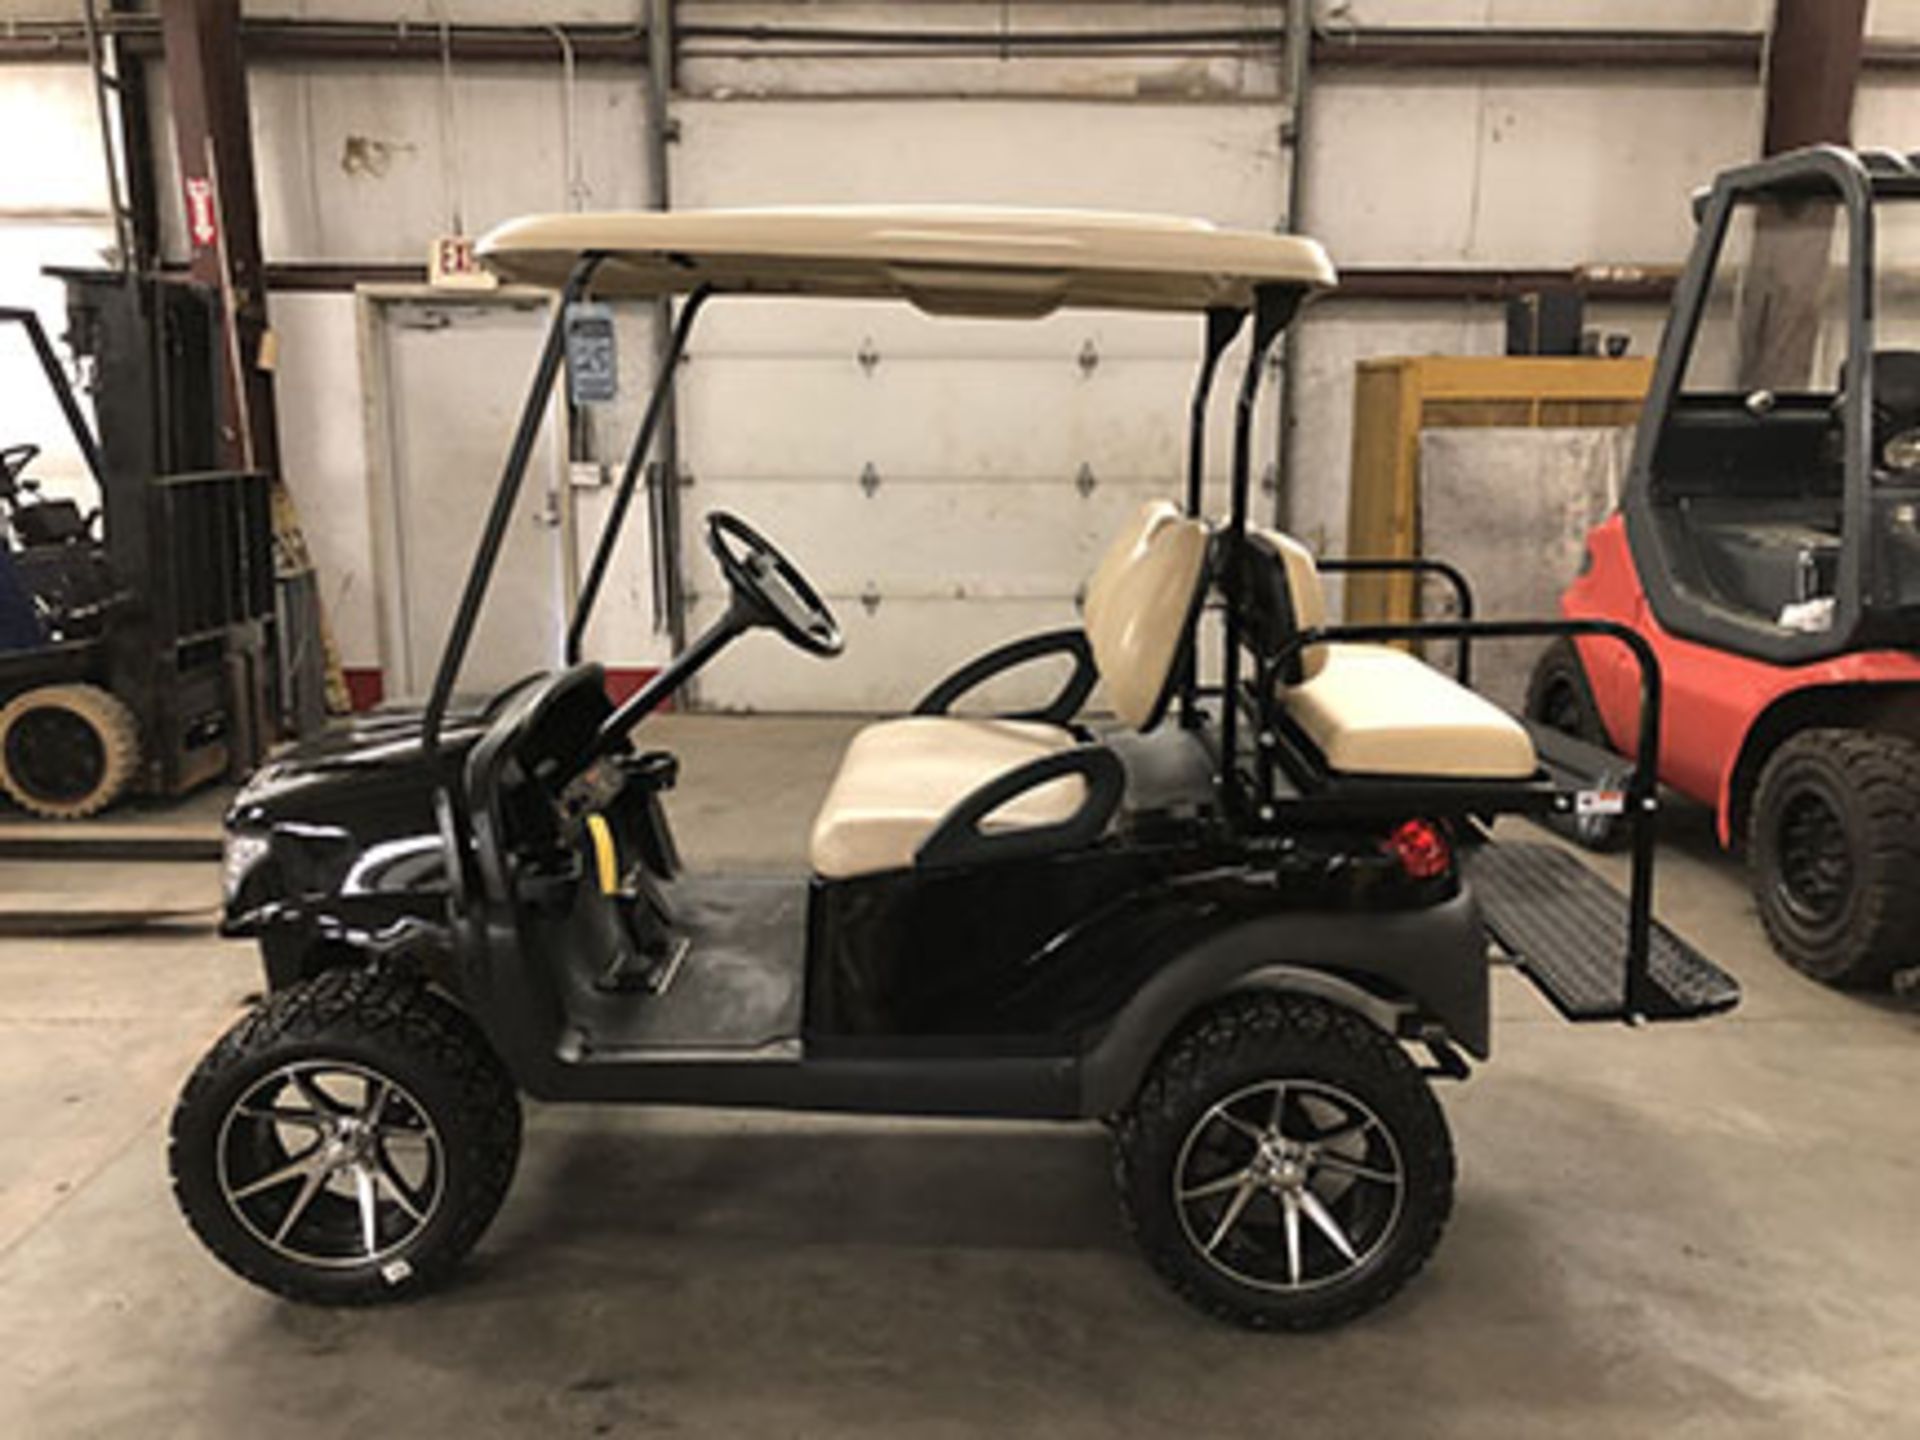 2014 CLUB CAR PRECEDENT ELECTRIC GOLF CART, WITH 48 VOLT CHARGER, 4-PASSENGER FOLD DOWN SEAT, LIFT